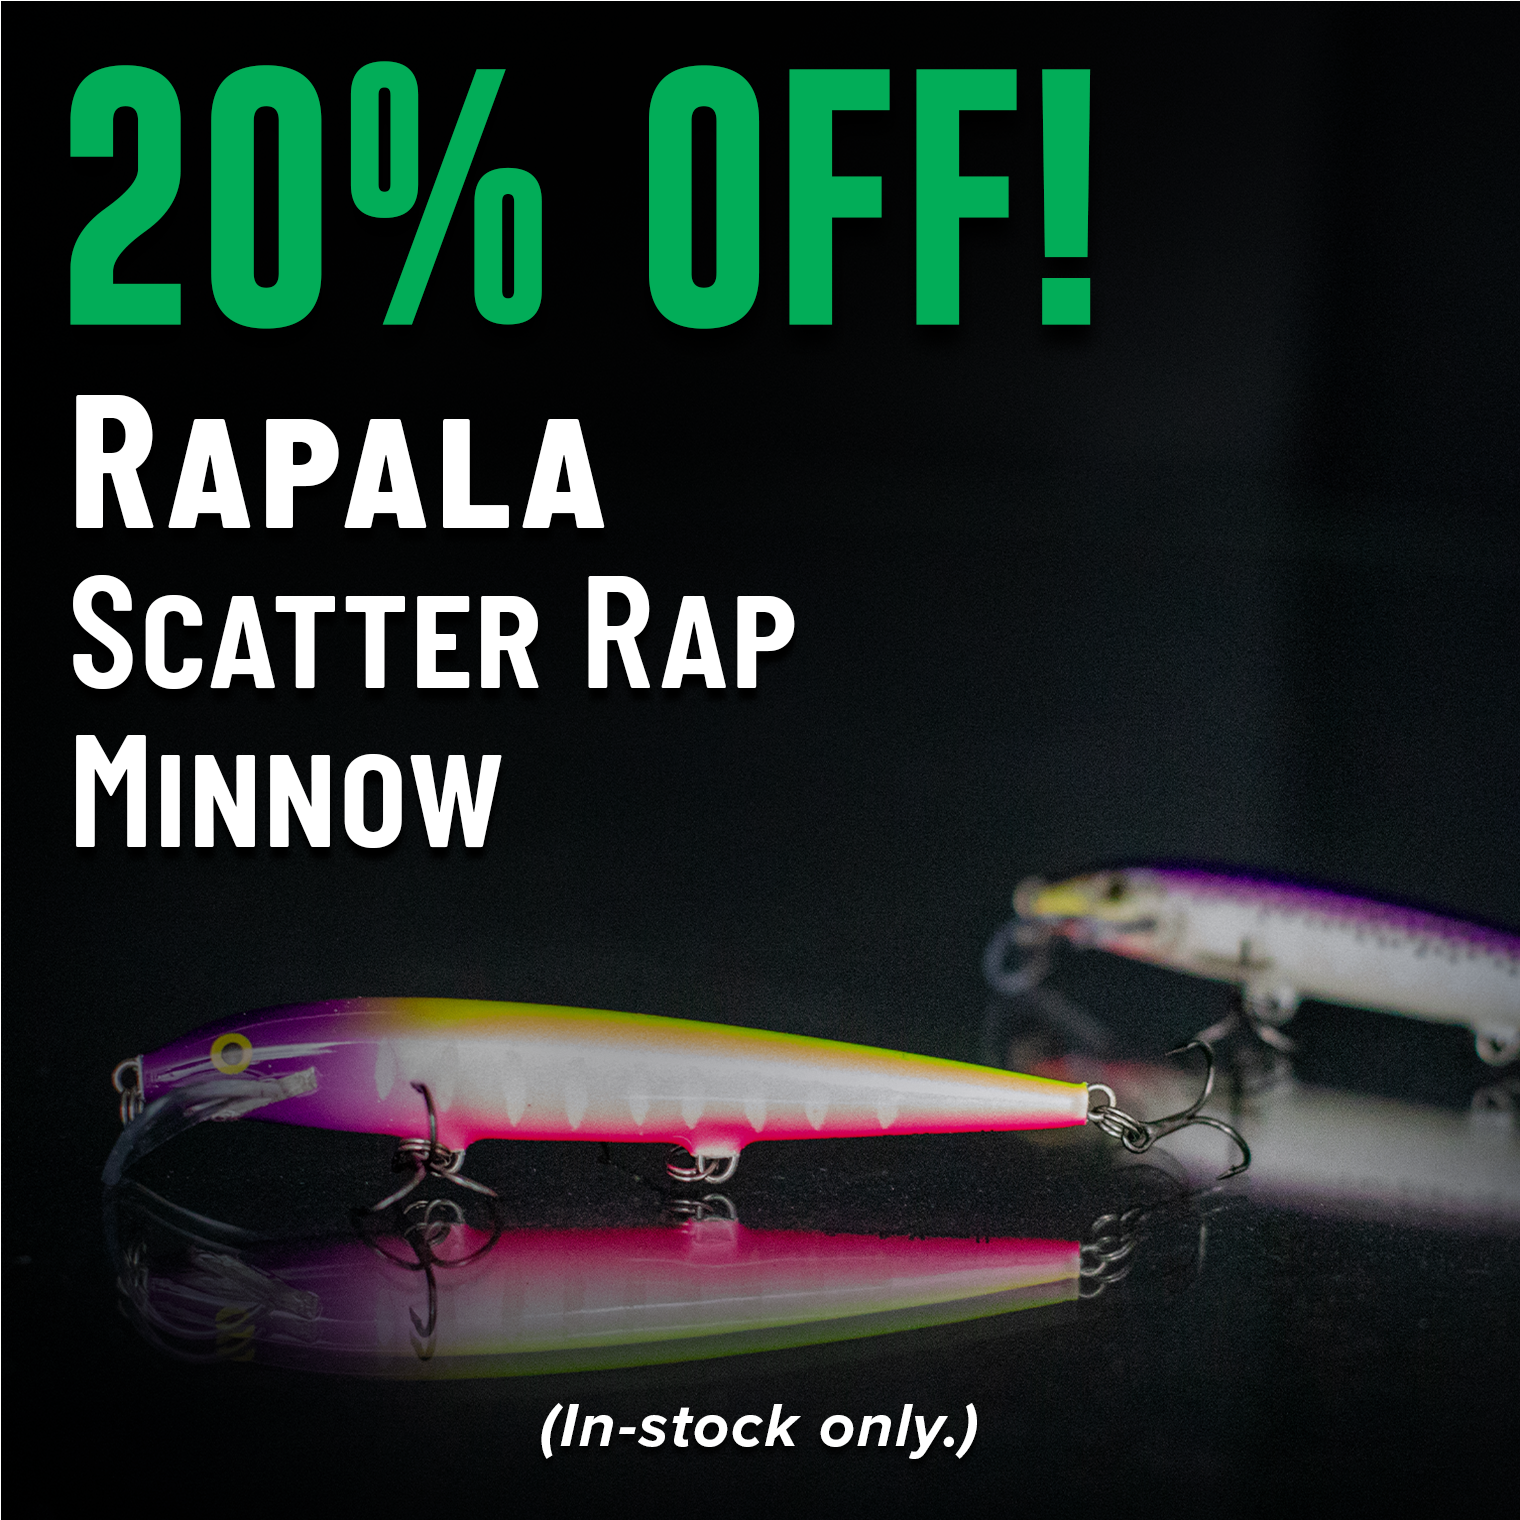 20% Off! Rapala Scatter Rap Minnow (In-stock only.)